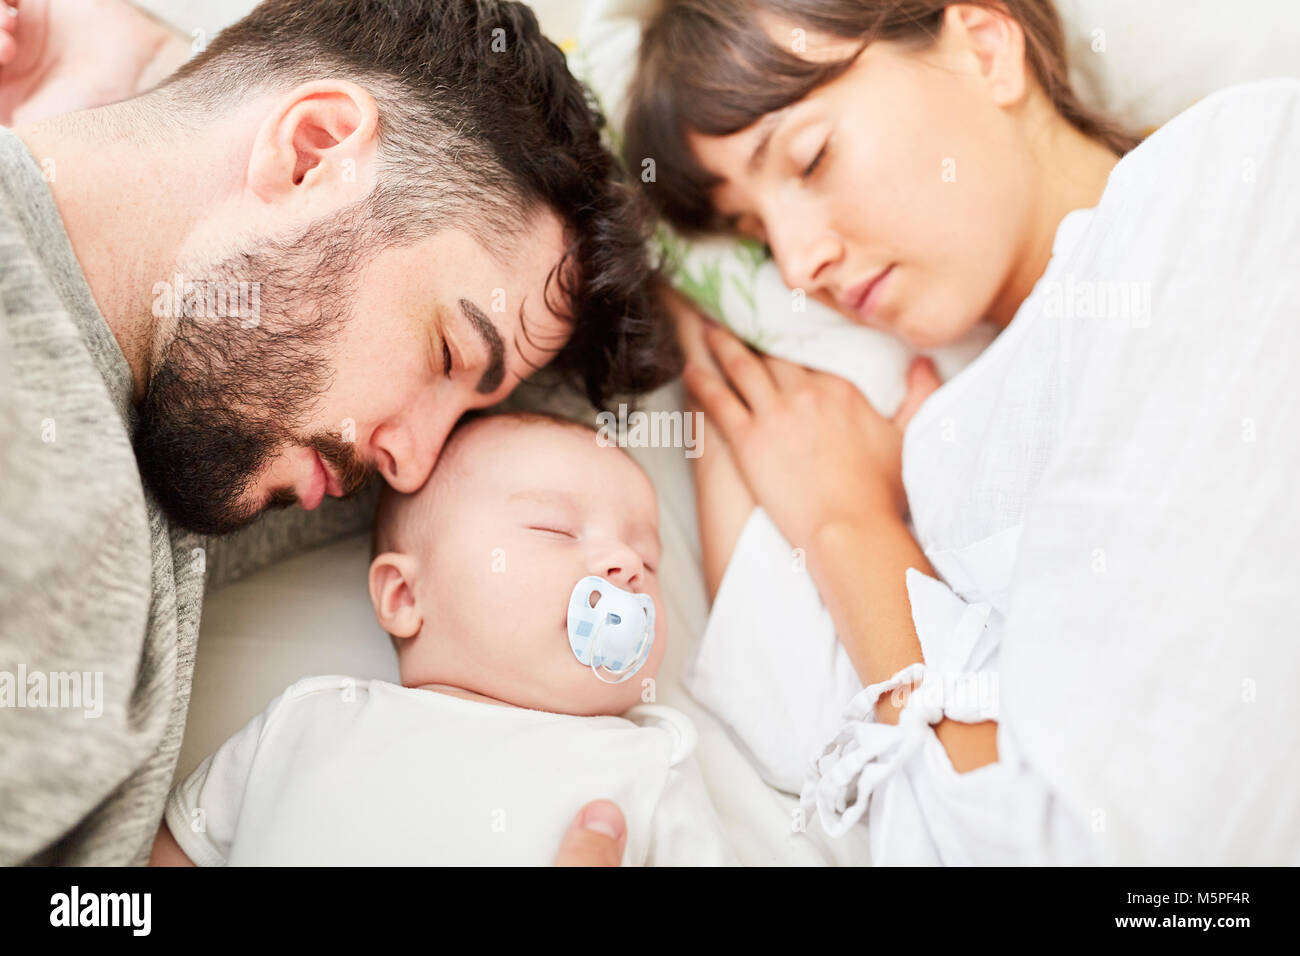 Sleeping parents and their little baby cuddle together relaxed Stock Photo